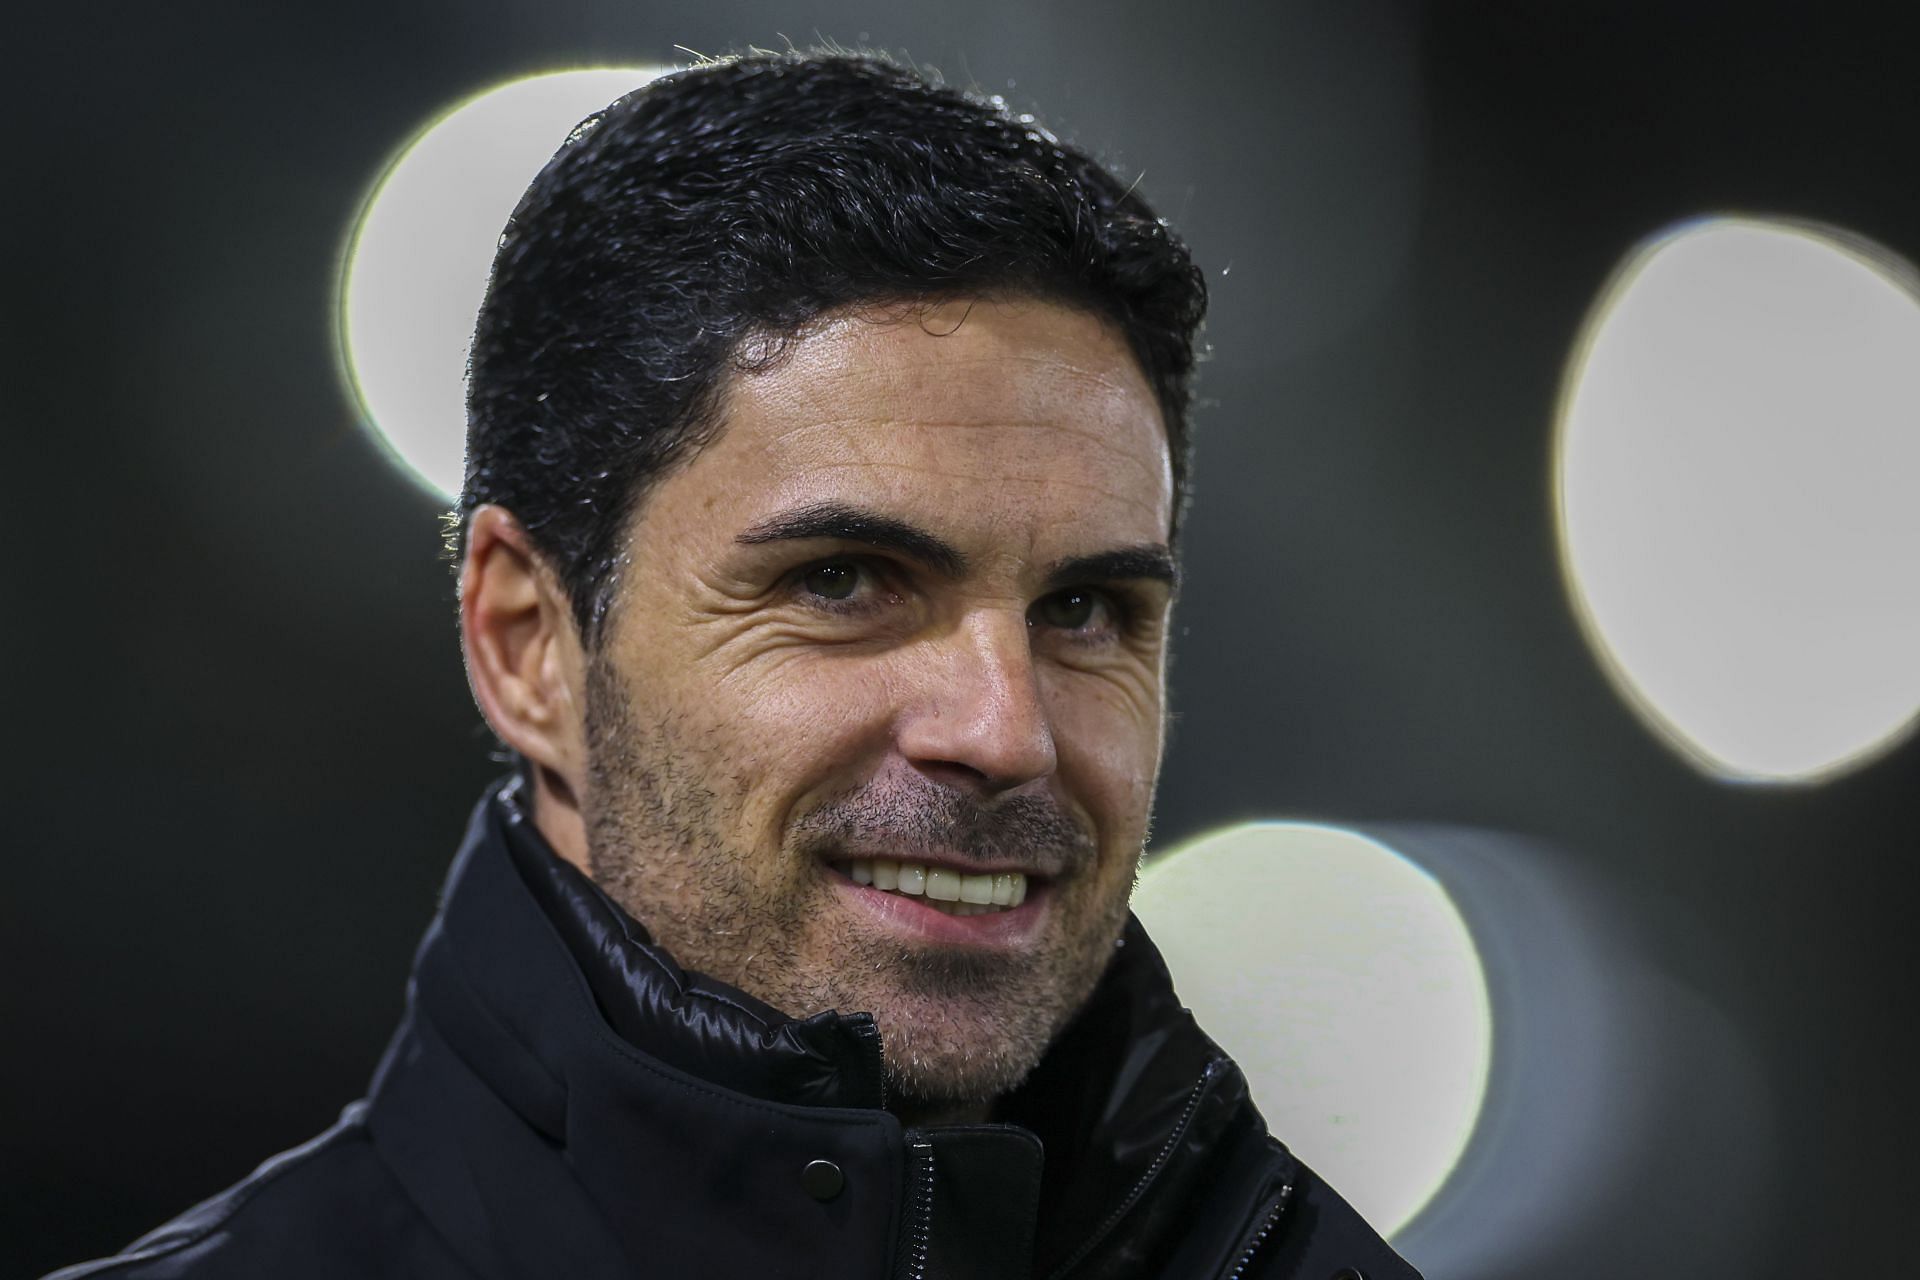 Arteta insisted that his side deserved more from the game.